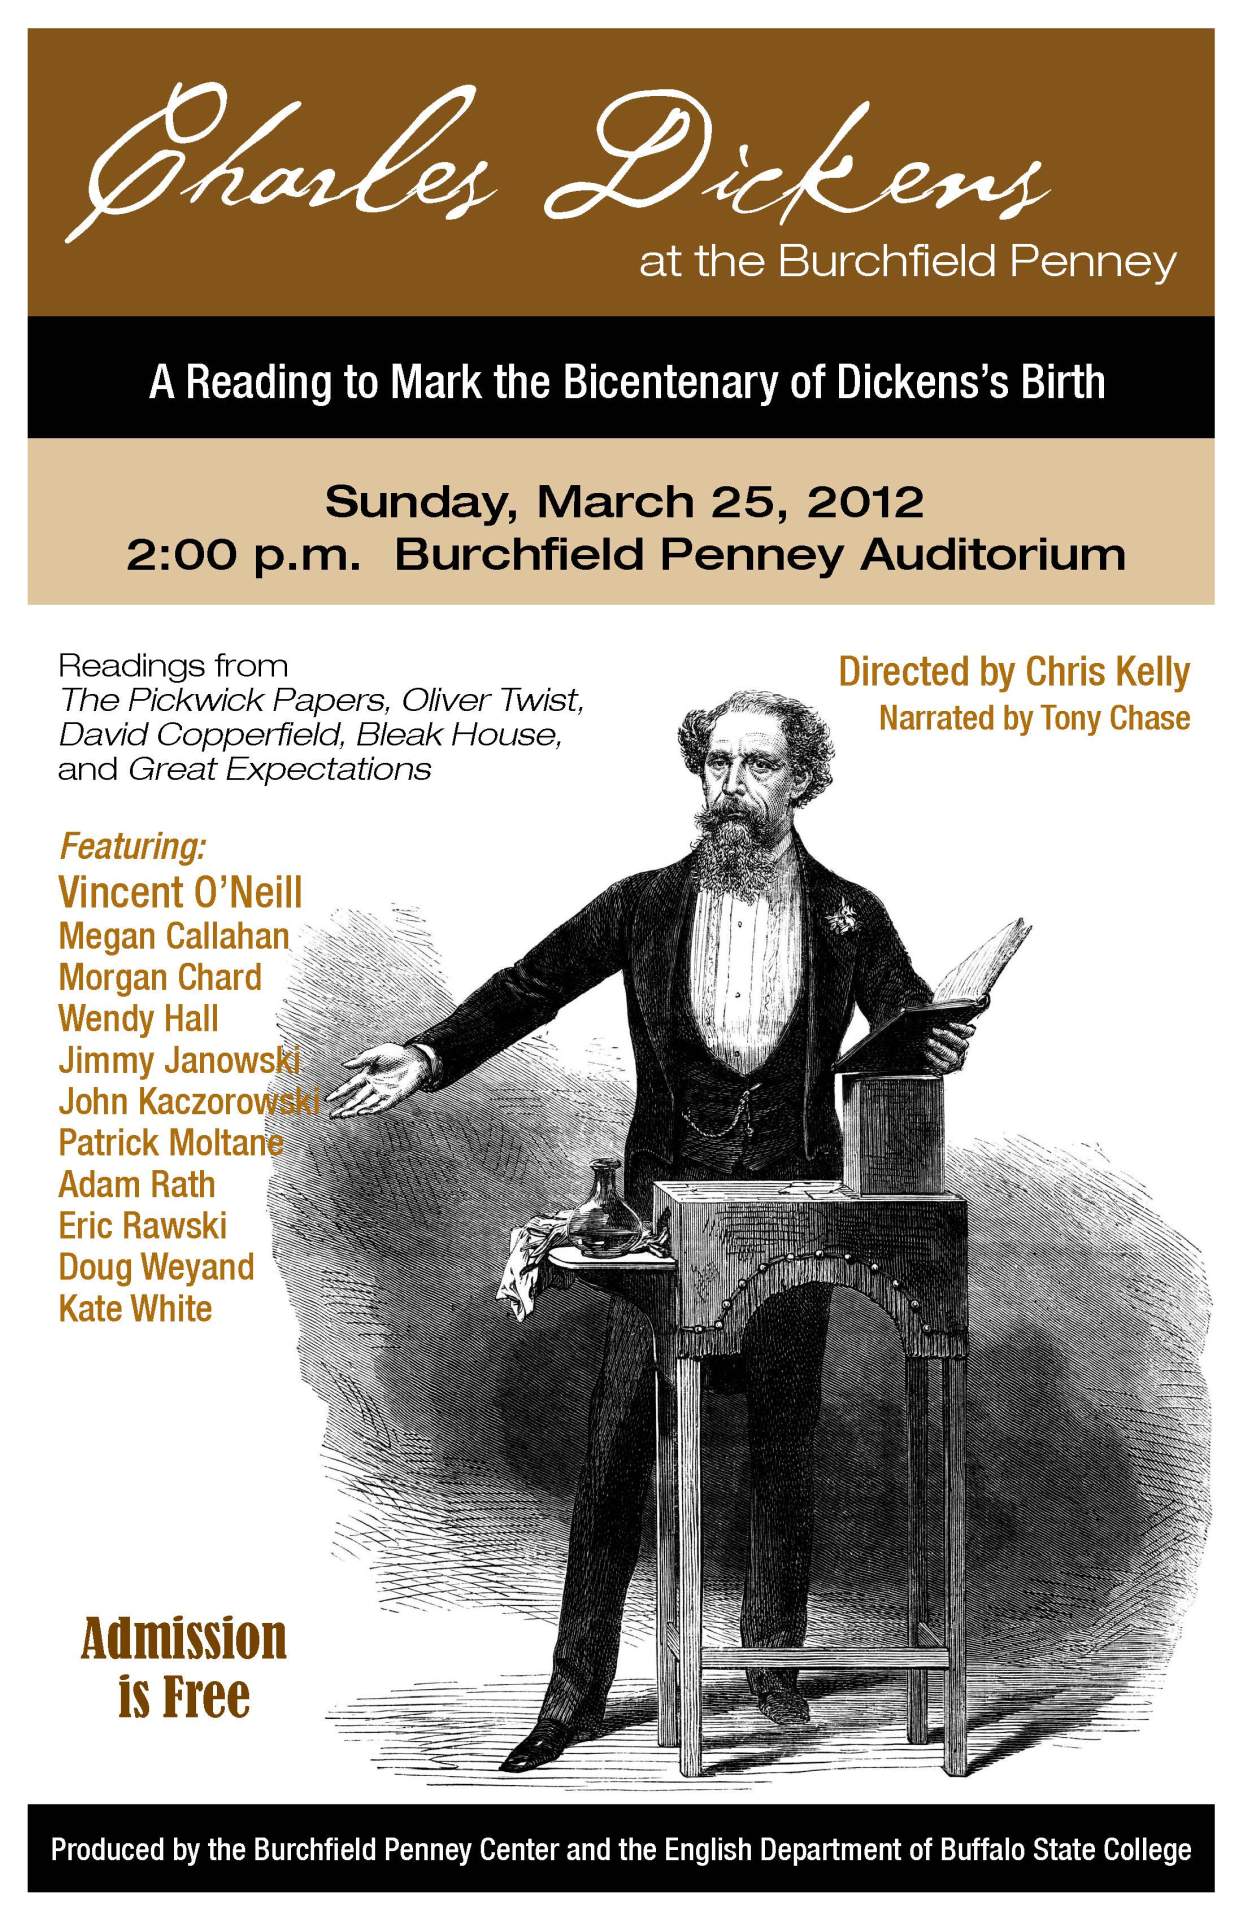 The Dickens Reading